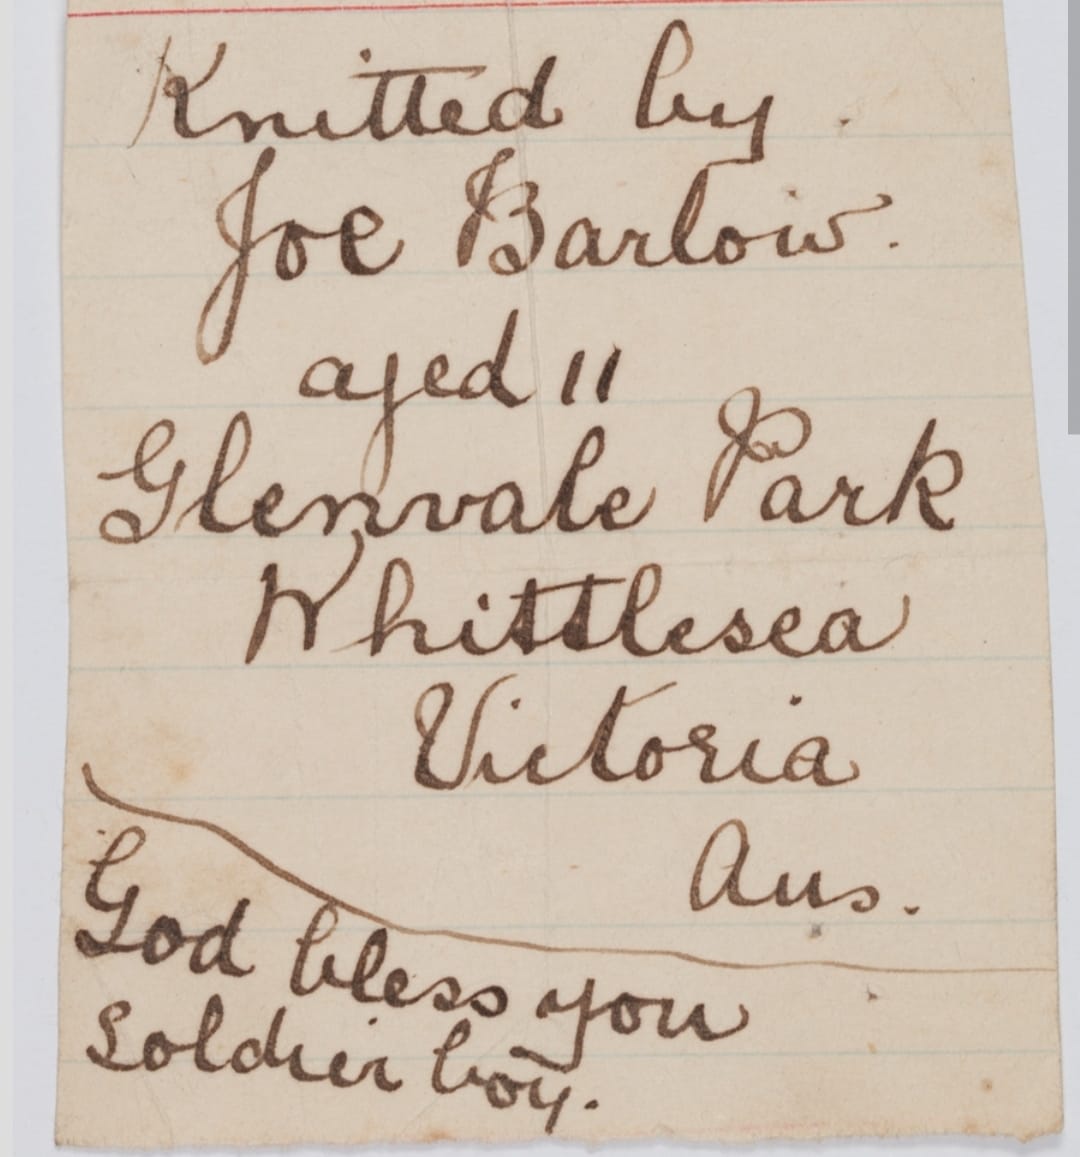 Jack Pickerell from NSW was serving in France when he found this note in a new pair of socks made back home.